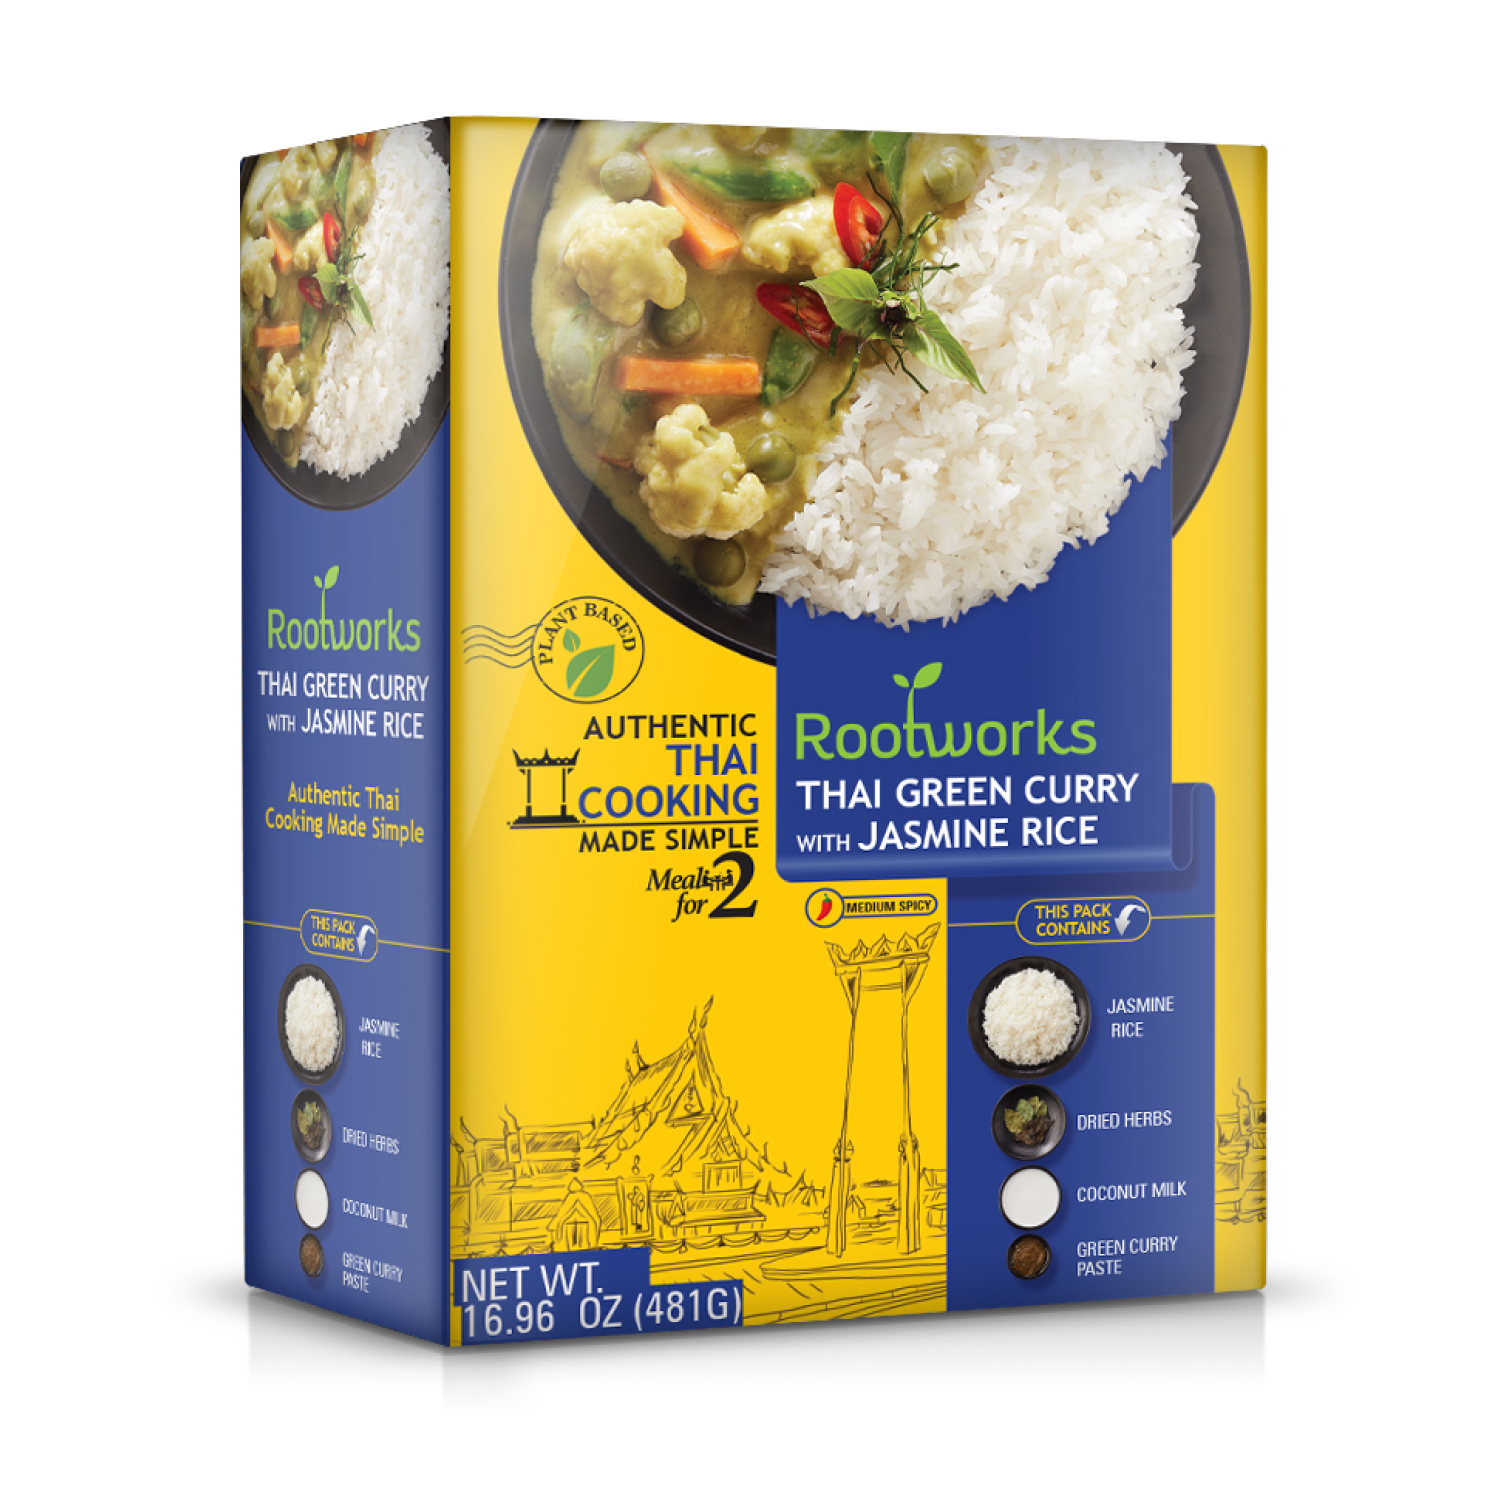 Thai Green Curry with Jasmine Rice - Pack of 6